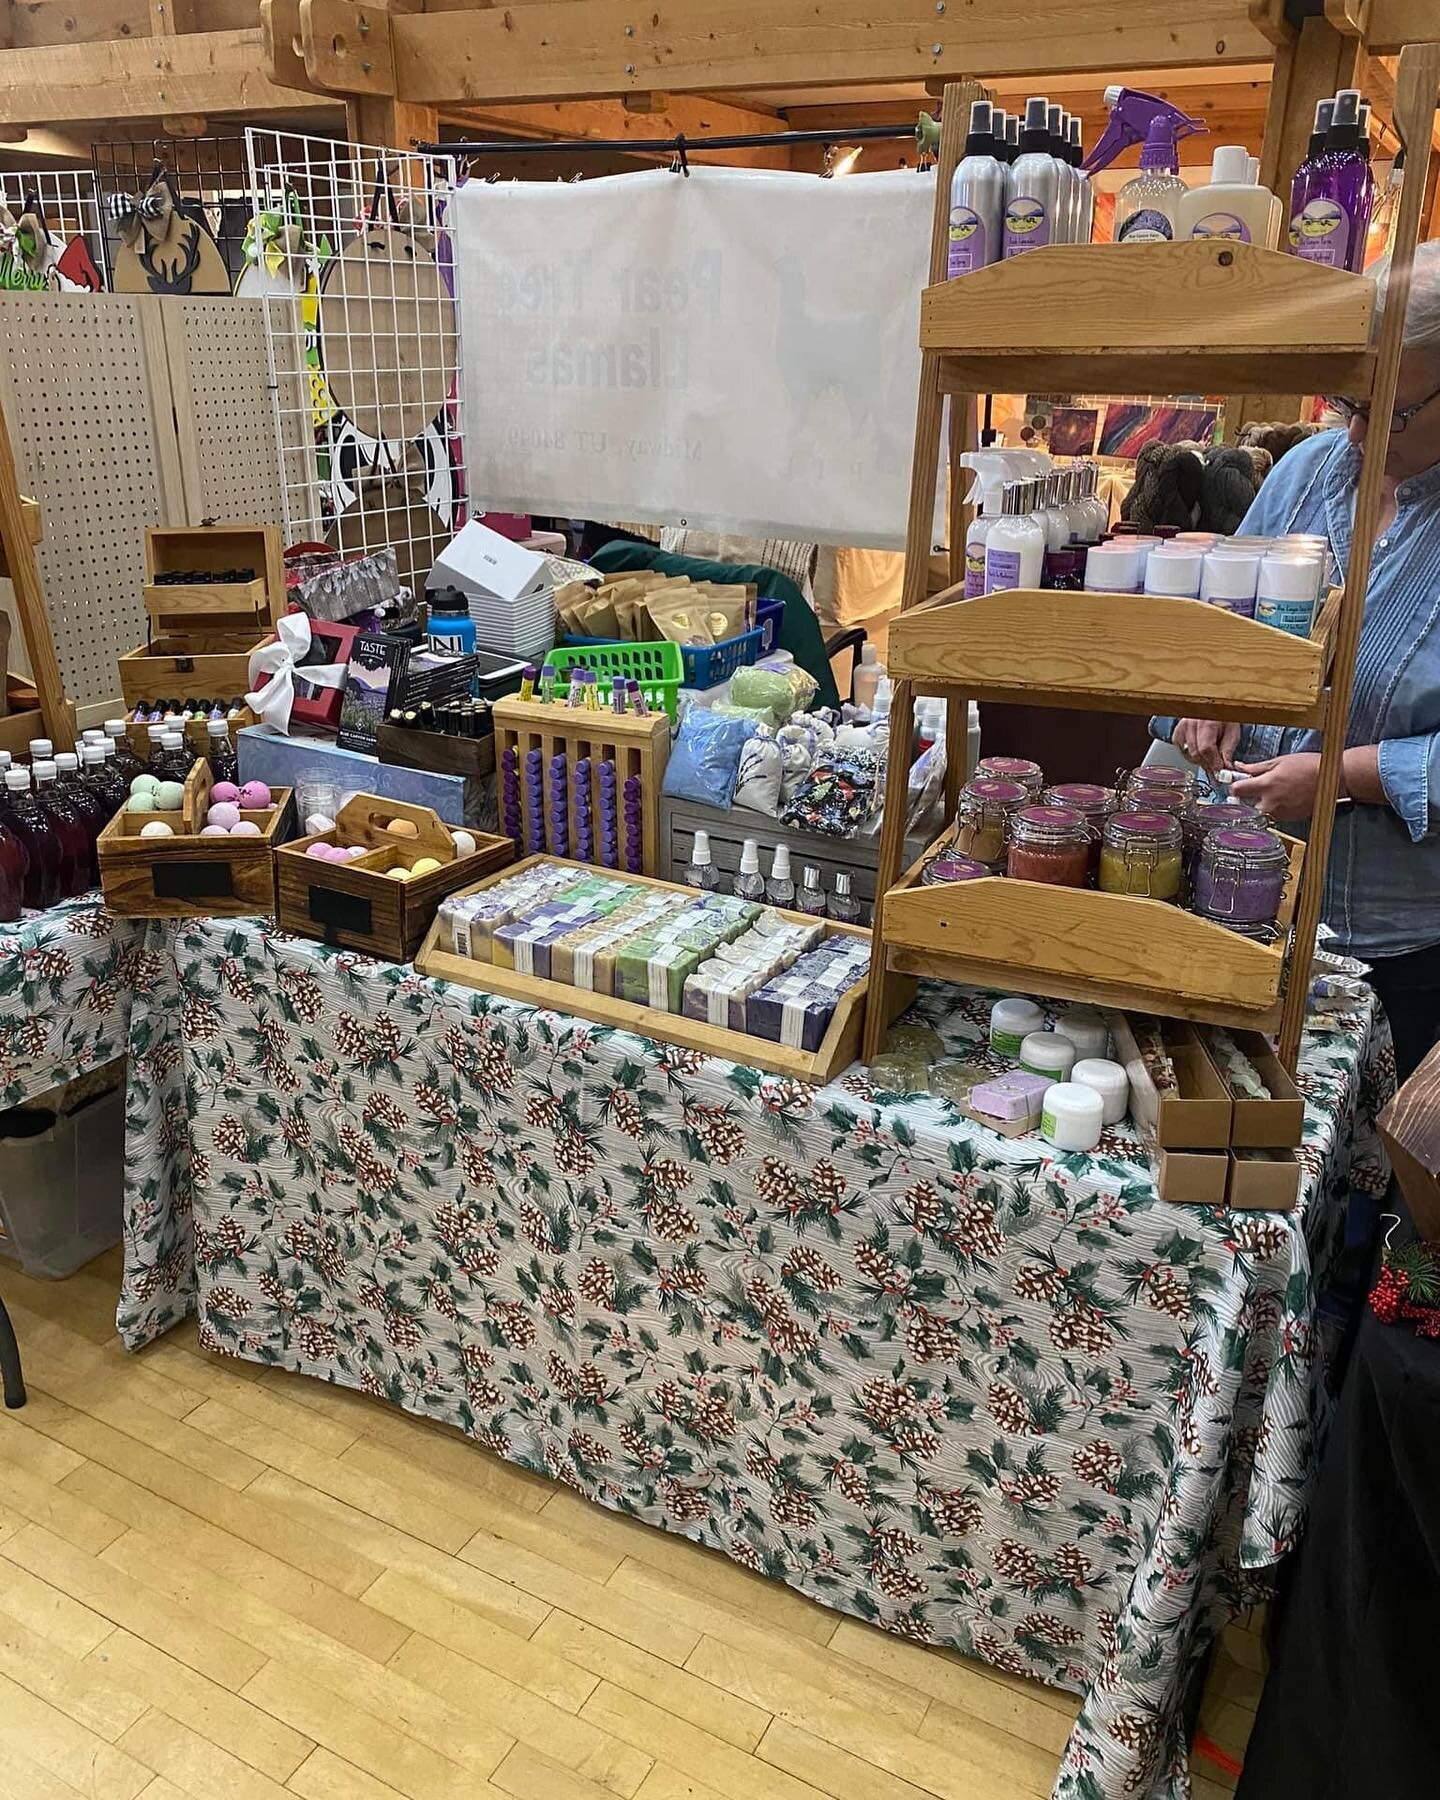 Come see us at Wheeler Farm Holiday Market today and tomorrow 9 to 5! #smallbusinesssaturday #lavender #christmas #holidays #utahsmallbusiness